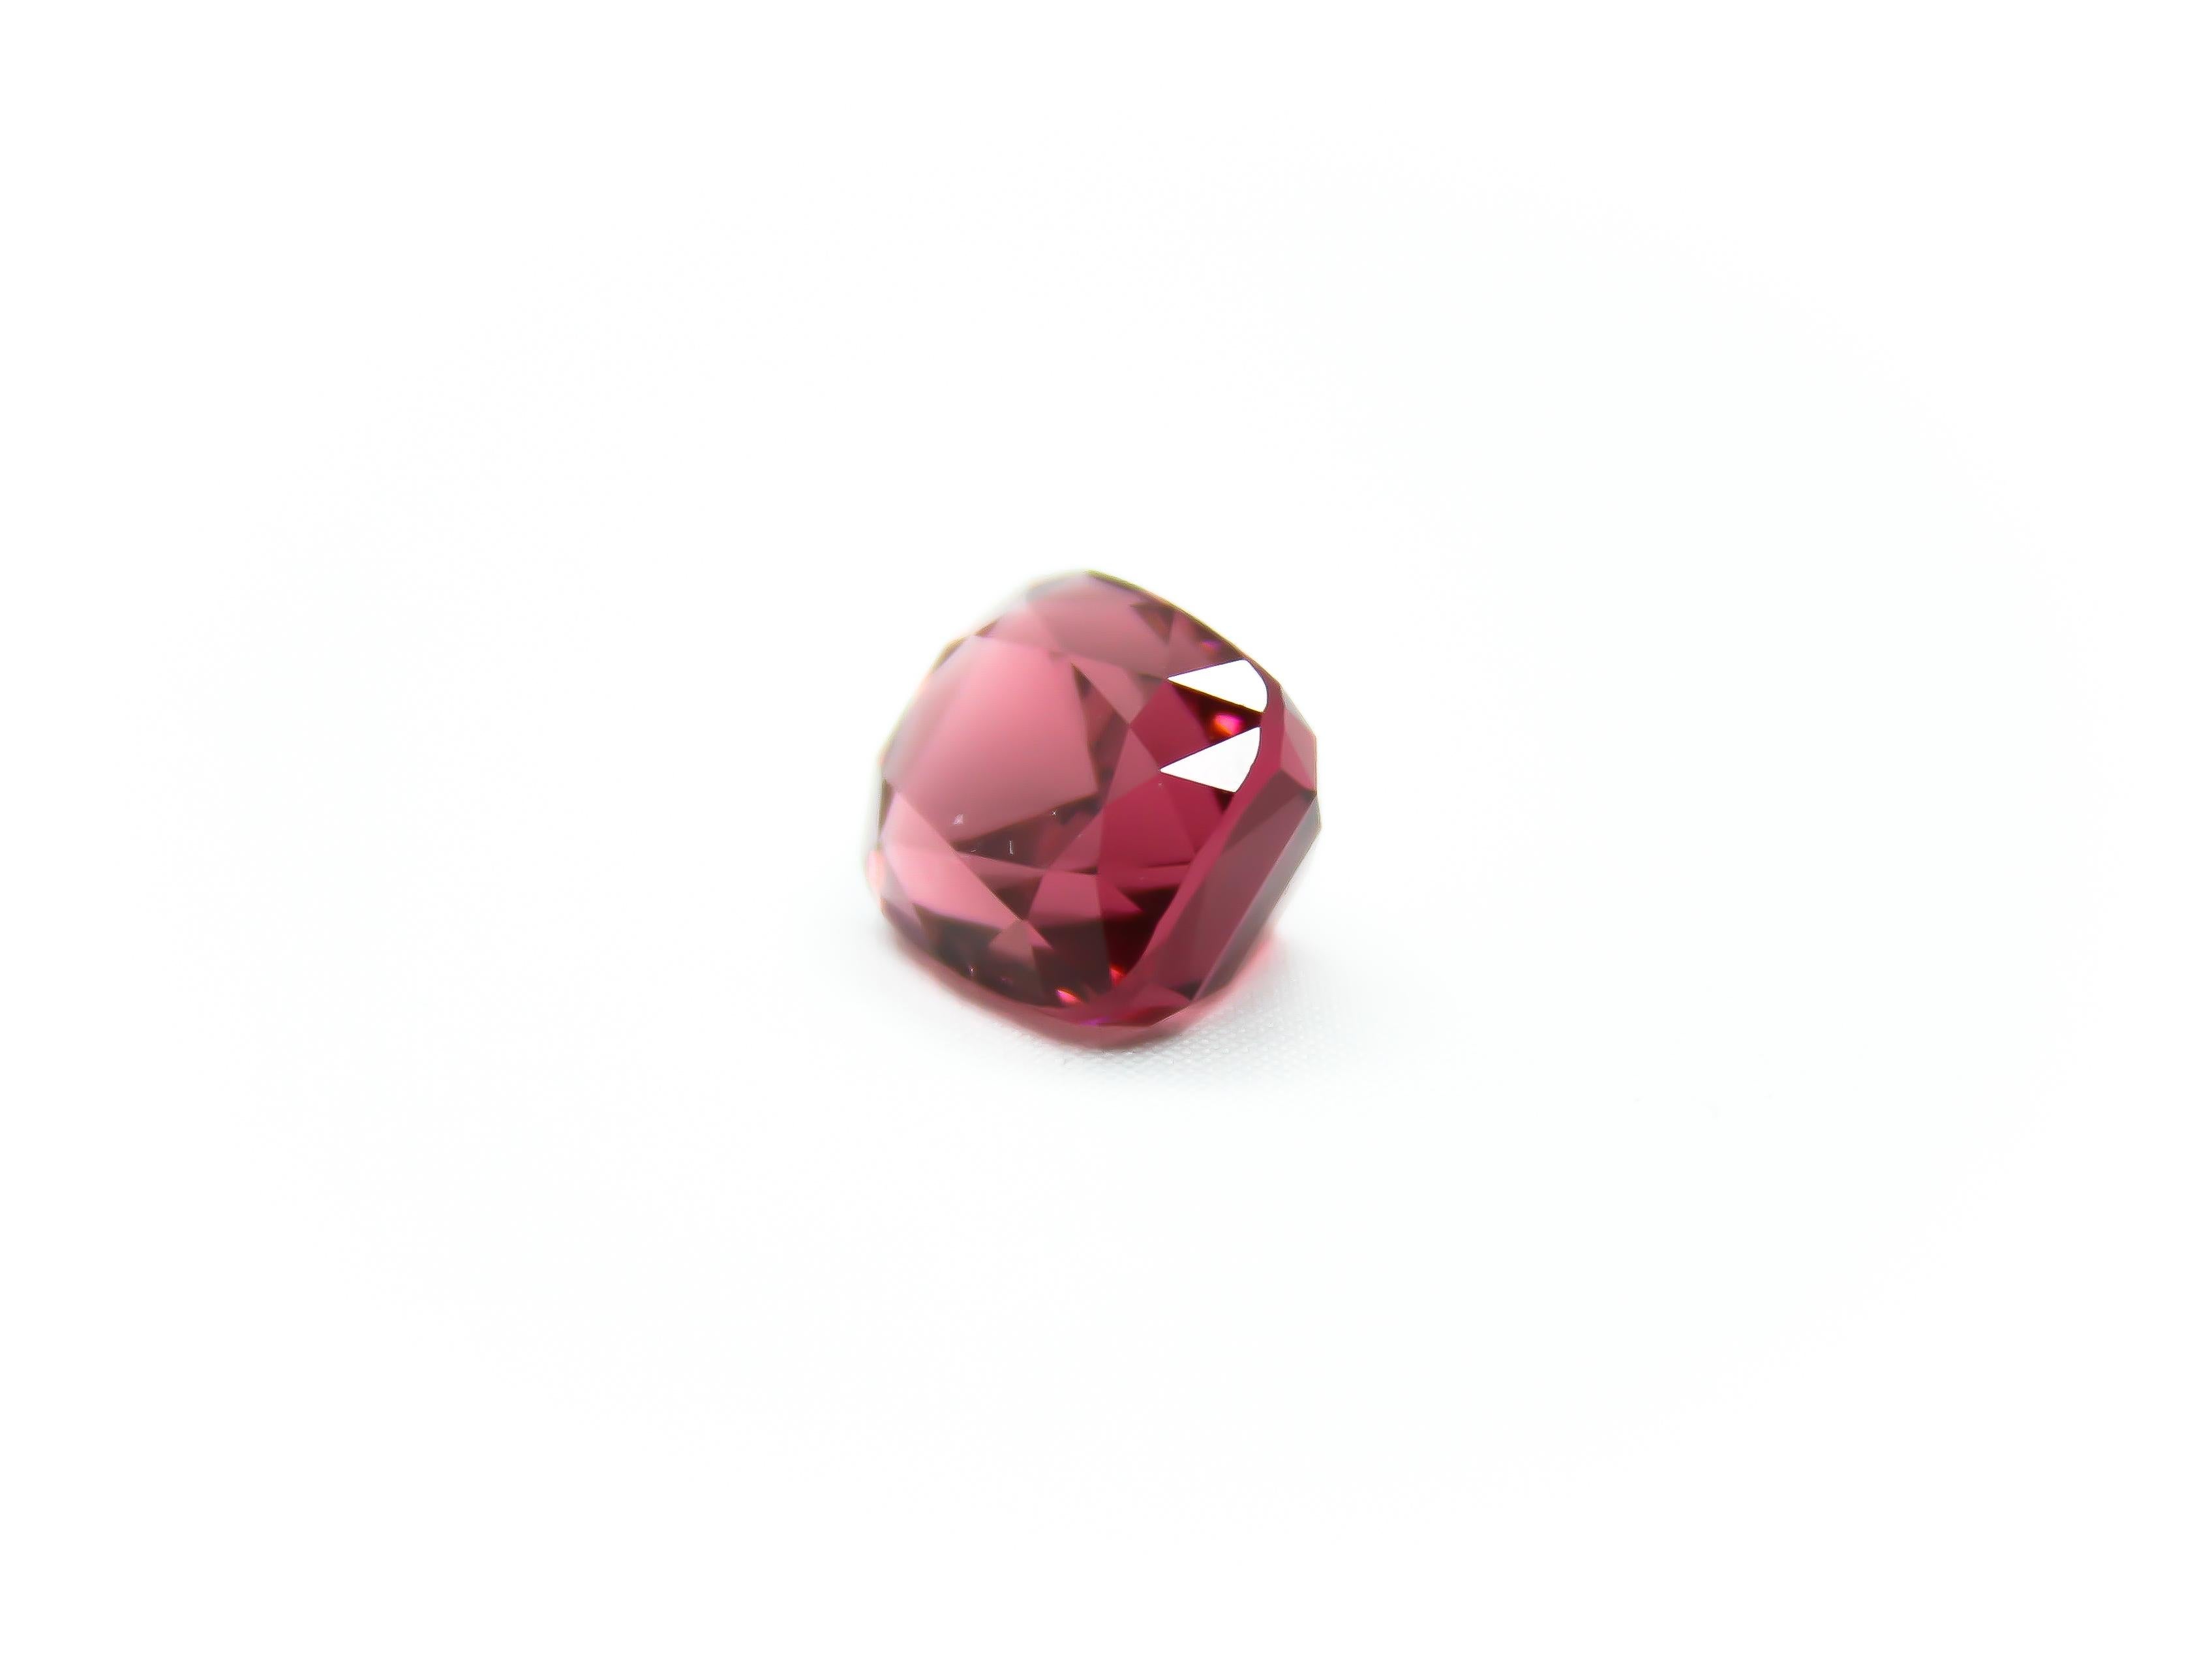 11.844 carats in weight   
14.14 x 11.34 x 9.92 mm in size   
Medium purple-red to pink hue  
Noticeable dichroic effect    
Very Good colour quality    
Eye-clean clarity    
80 % brilliance, 5 % window, 15 % extinction


This elegant, gem-quality